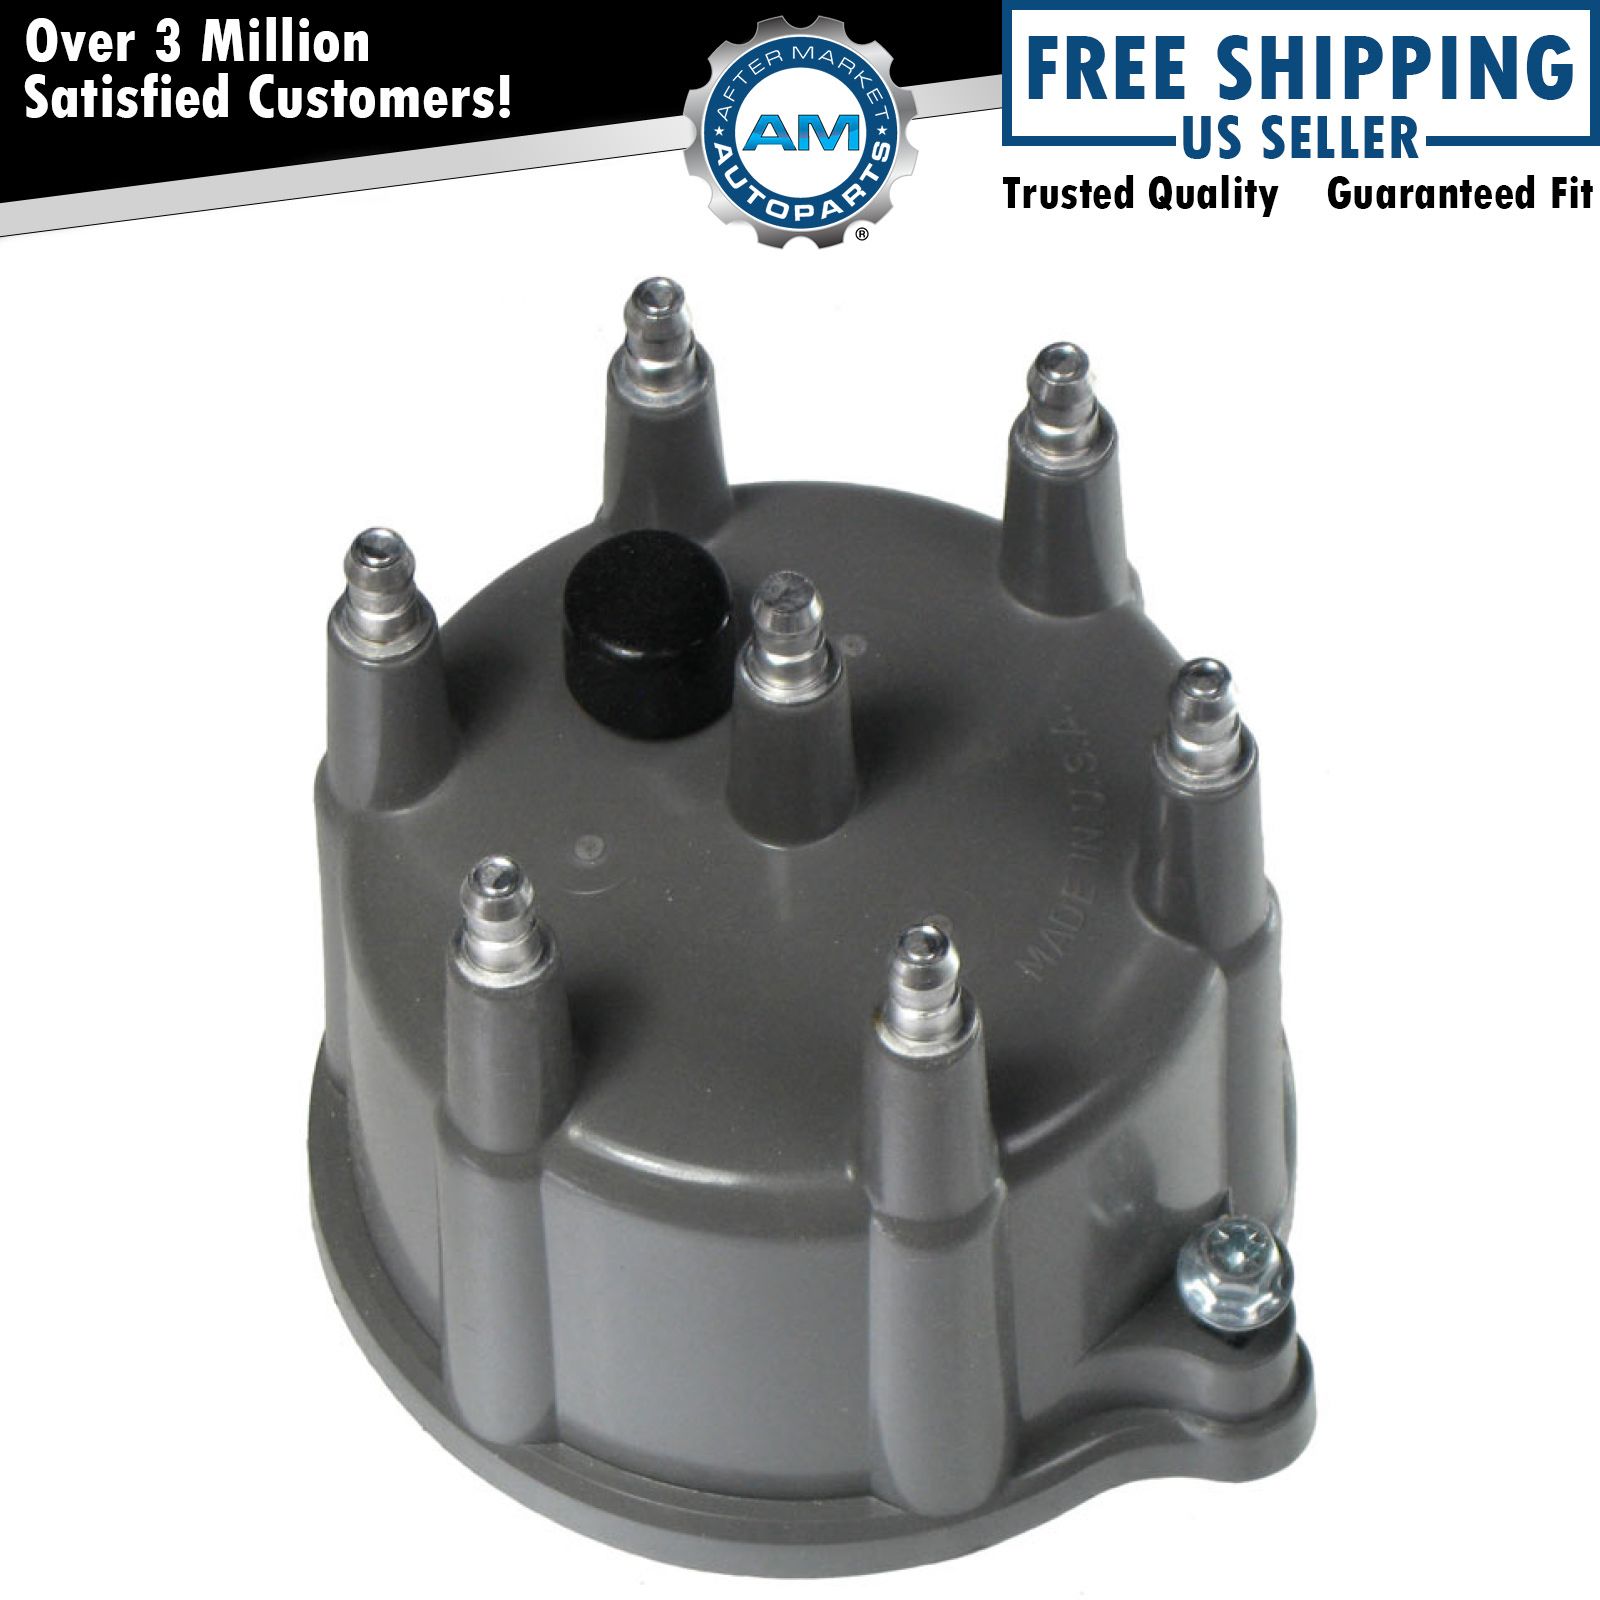 Ignition Distributor Cap for Jeep Cherokee Ford Truck Van Lincoln Mazda Mercury